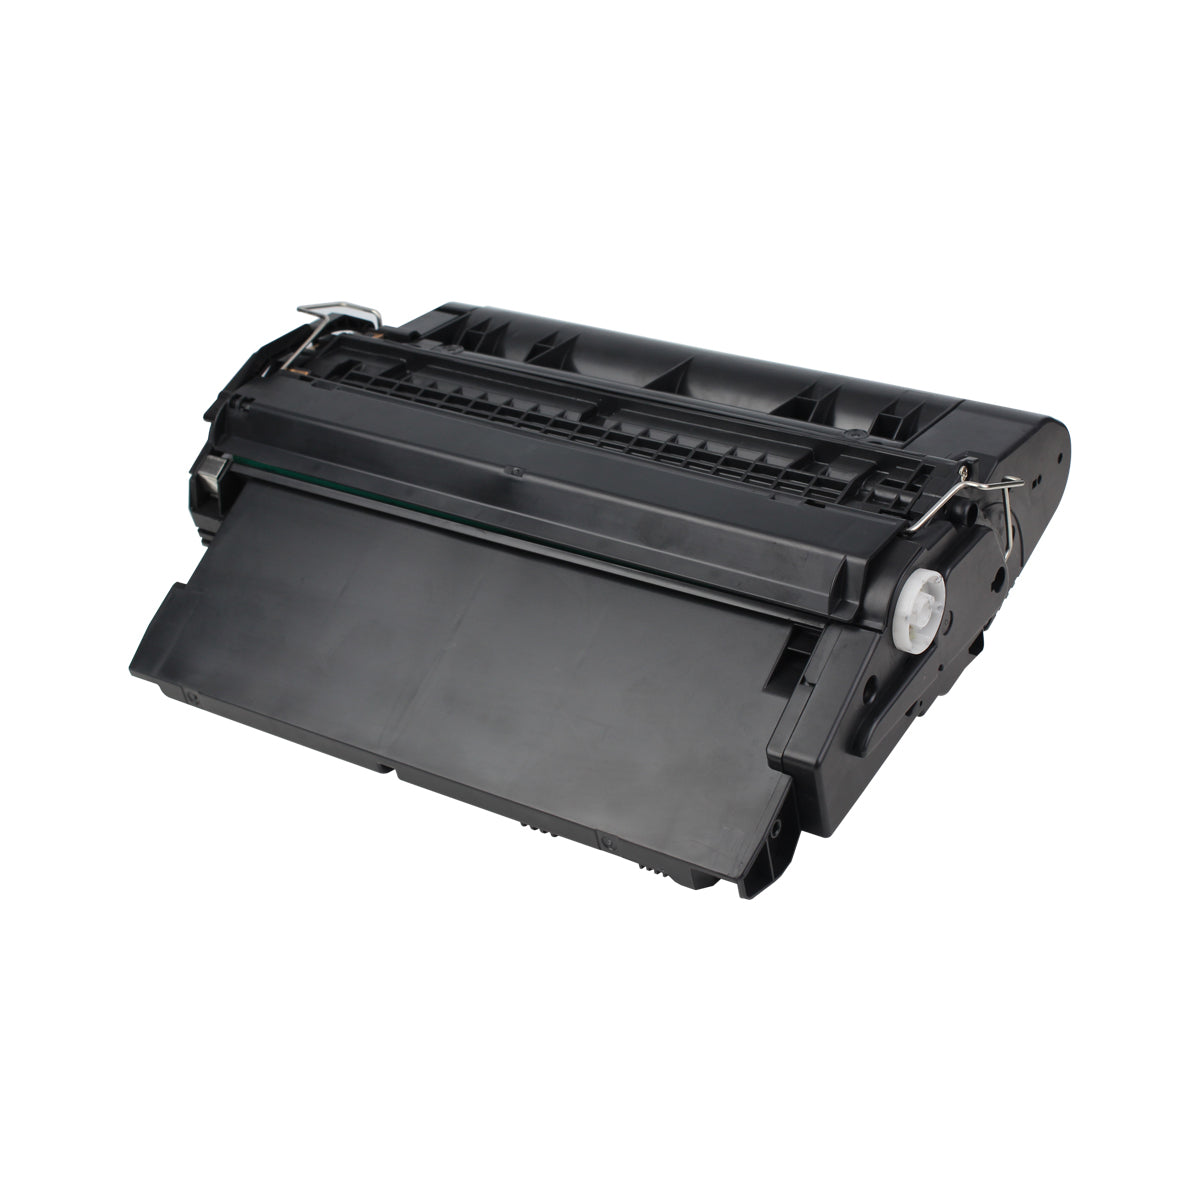 Catch Supplies Replacement HP Q5942A Standard Yield Laser Printer Tone